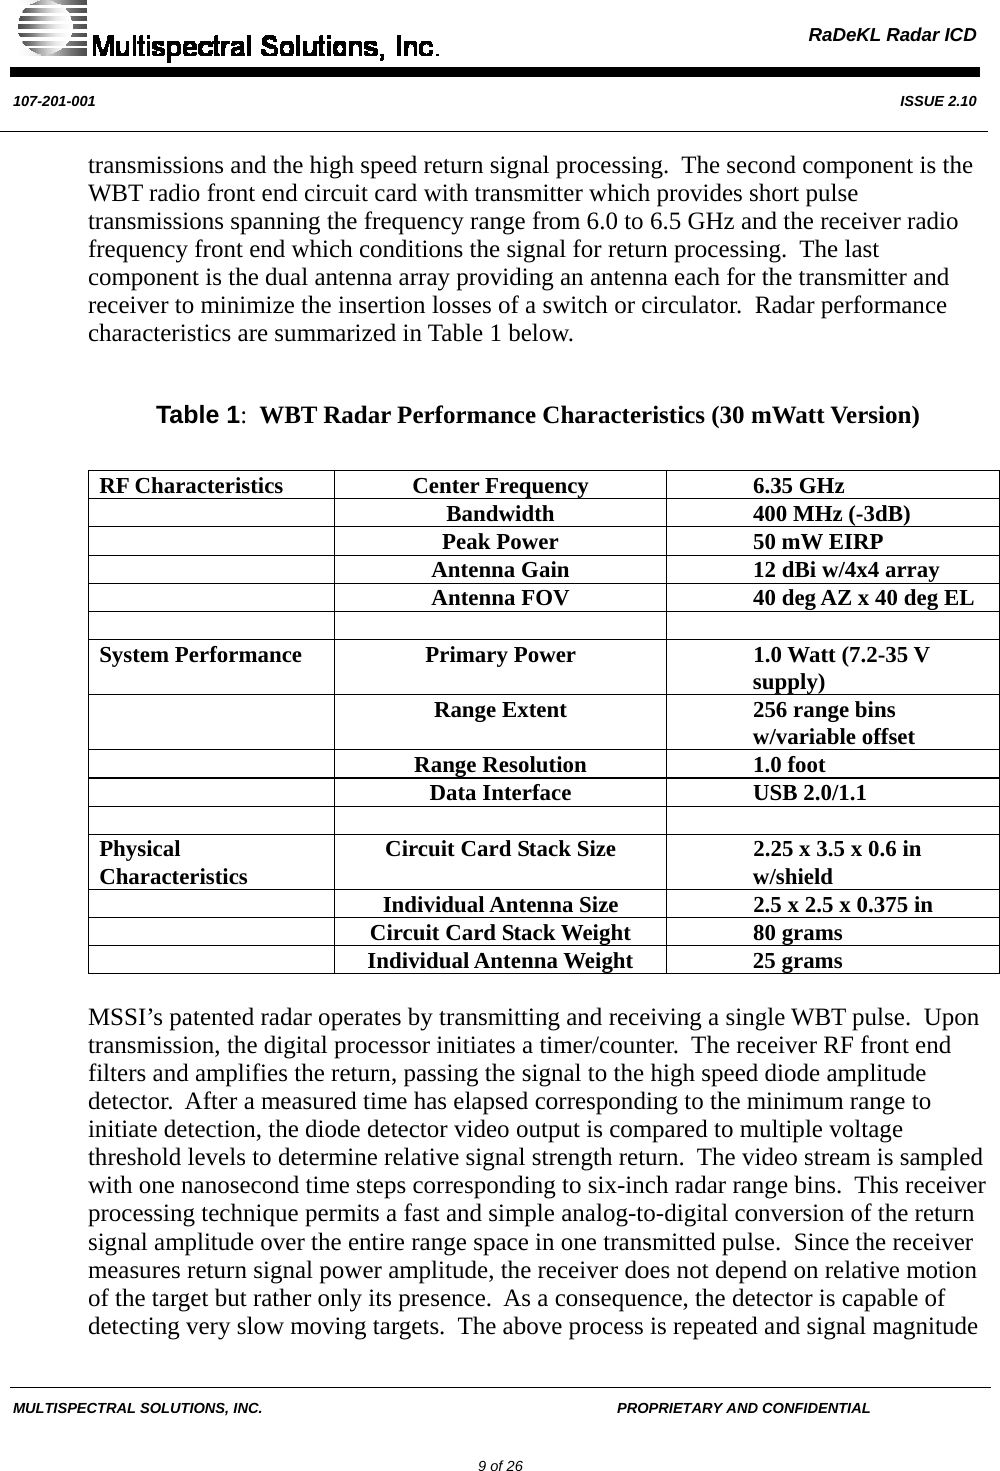  RaDeKL Radar ICD  107-201-001  ISSUE 2.10  MULTISPECTRAL SOLUTIONS, INC.       PROPRIETARY AND CONFIDENTIAL         9 of 26 transmissions and the high speed return signal processing.  The second component is the WBT radio front end circuit card with transmitter which provides short pulse transmissions spanning the frequency range from 6.0 to 6.5 GHz and the receiver radio frequency front end which conditions the signal for return processing.  The last component is the dual antenna array providing an antenna each for the transmitter and receiver to minimize the insertion losses of a switch or circulator.  Radar performance characteristics are summarized in Table 1 below.        Table 1:  WBT Radar Performance Characteristics (30 mWatt Version)  RF Characteristics  Center Frequency  6.35 GHz   Bandwidth  400 MHz (-3dB)   Peak Power  50 mW EIRP   Antenna Gain  12 dBi w/4x4 array   Antenna FOV  40 deg AZ x 40 deg EL    System Performance  Primary Power  1.0 Watt (7.2-35 V supply)   Range Extent  256 range bins w/variable offset   Range Resolution  1.0 foot   Data Interface  USB 2.0/1.1    Physical Characteristics  Circuit Card Stack Size  2.25 x 3.5 x 0.6 in w/shield   Individual Antenna Size   2.5 x 2.5 x 0.375 in   Circuit Card Stack Weight  80 grams   Individual Antenna Weight   25 grams  MSSI’s patented radar operates by transmitting and receiving a single WBT pulse.  Upon transmission, the digital processor initiates a timer/counter.  The receiver RF front end filters and amplifies the return, passing the signal to the high speed diode amplitude detector.  After a measured time has elapsed corresponding to the minimum range to initiate detection, the diode detector video output is compared to multiple voltage threshold levels to determine relative signal strength return.  The video stream is sampled with one nanosecond time steps corresponding to six-inch radar range bins.  This receiver processing technique permits a fast and simple analog-to-digital conversion of the return signal amplitude over the entire range space in one transmitted pulse.  Since the receiver measures return signal power amplitude, the receiver does not depend on relative motion of the target but rather only its presence.  As a consequence, the detector is capable of detecting very slow moving targets.  The above process is repeated and signal magnitude 